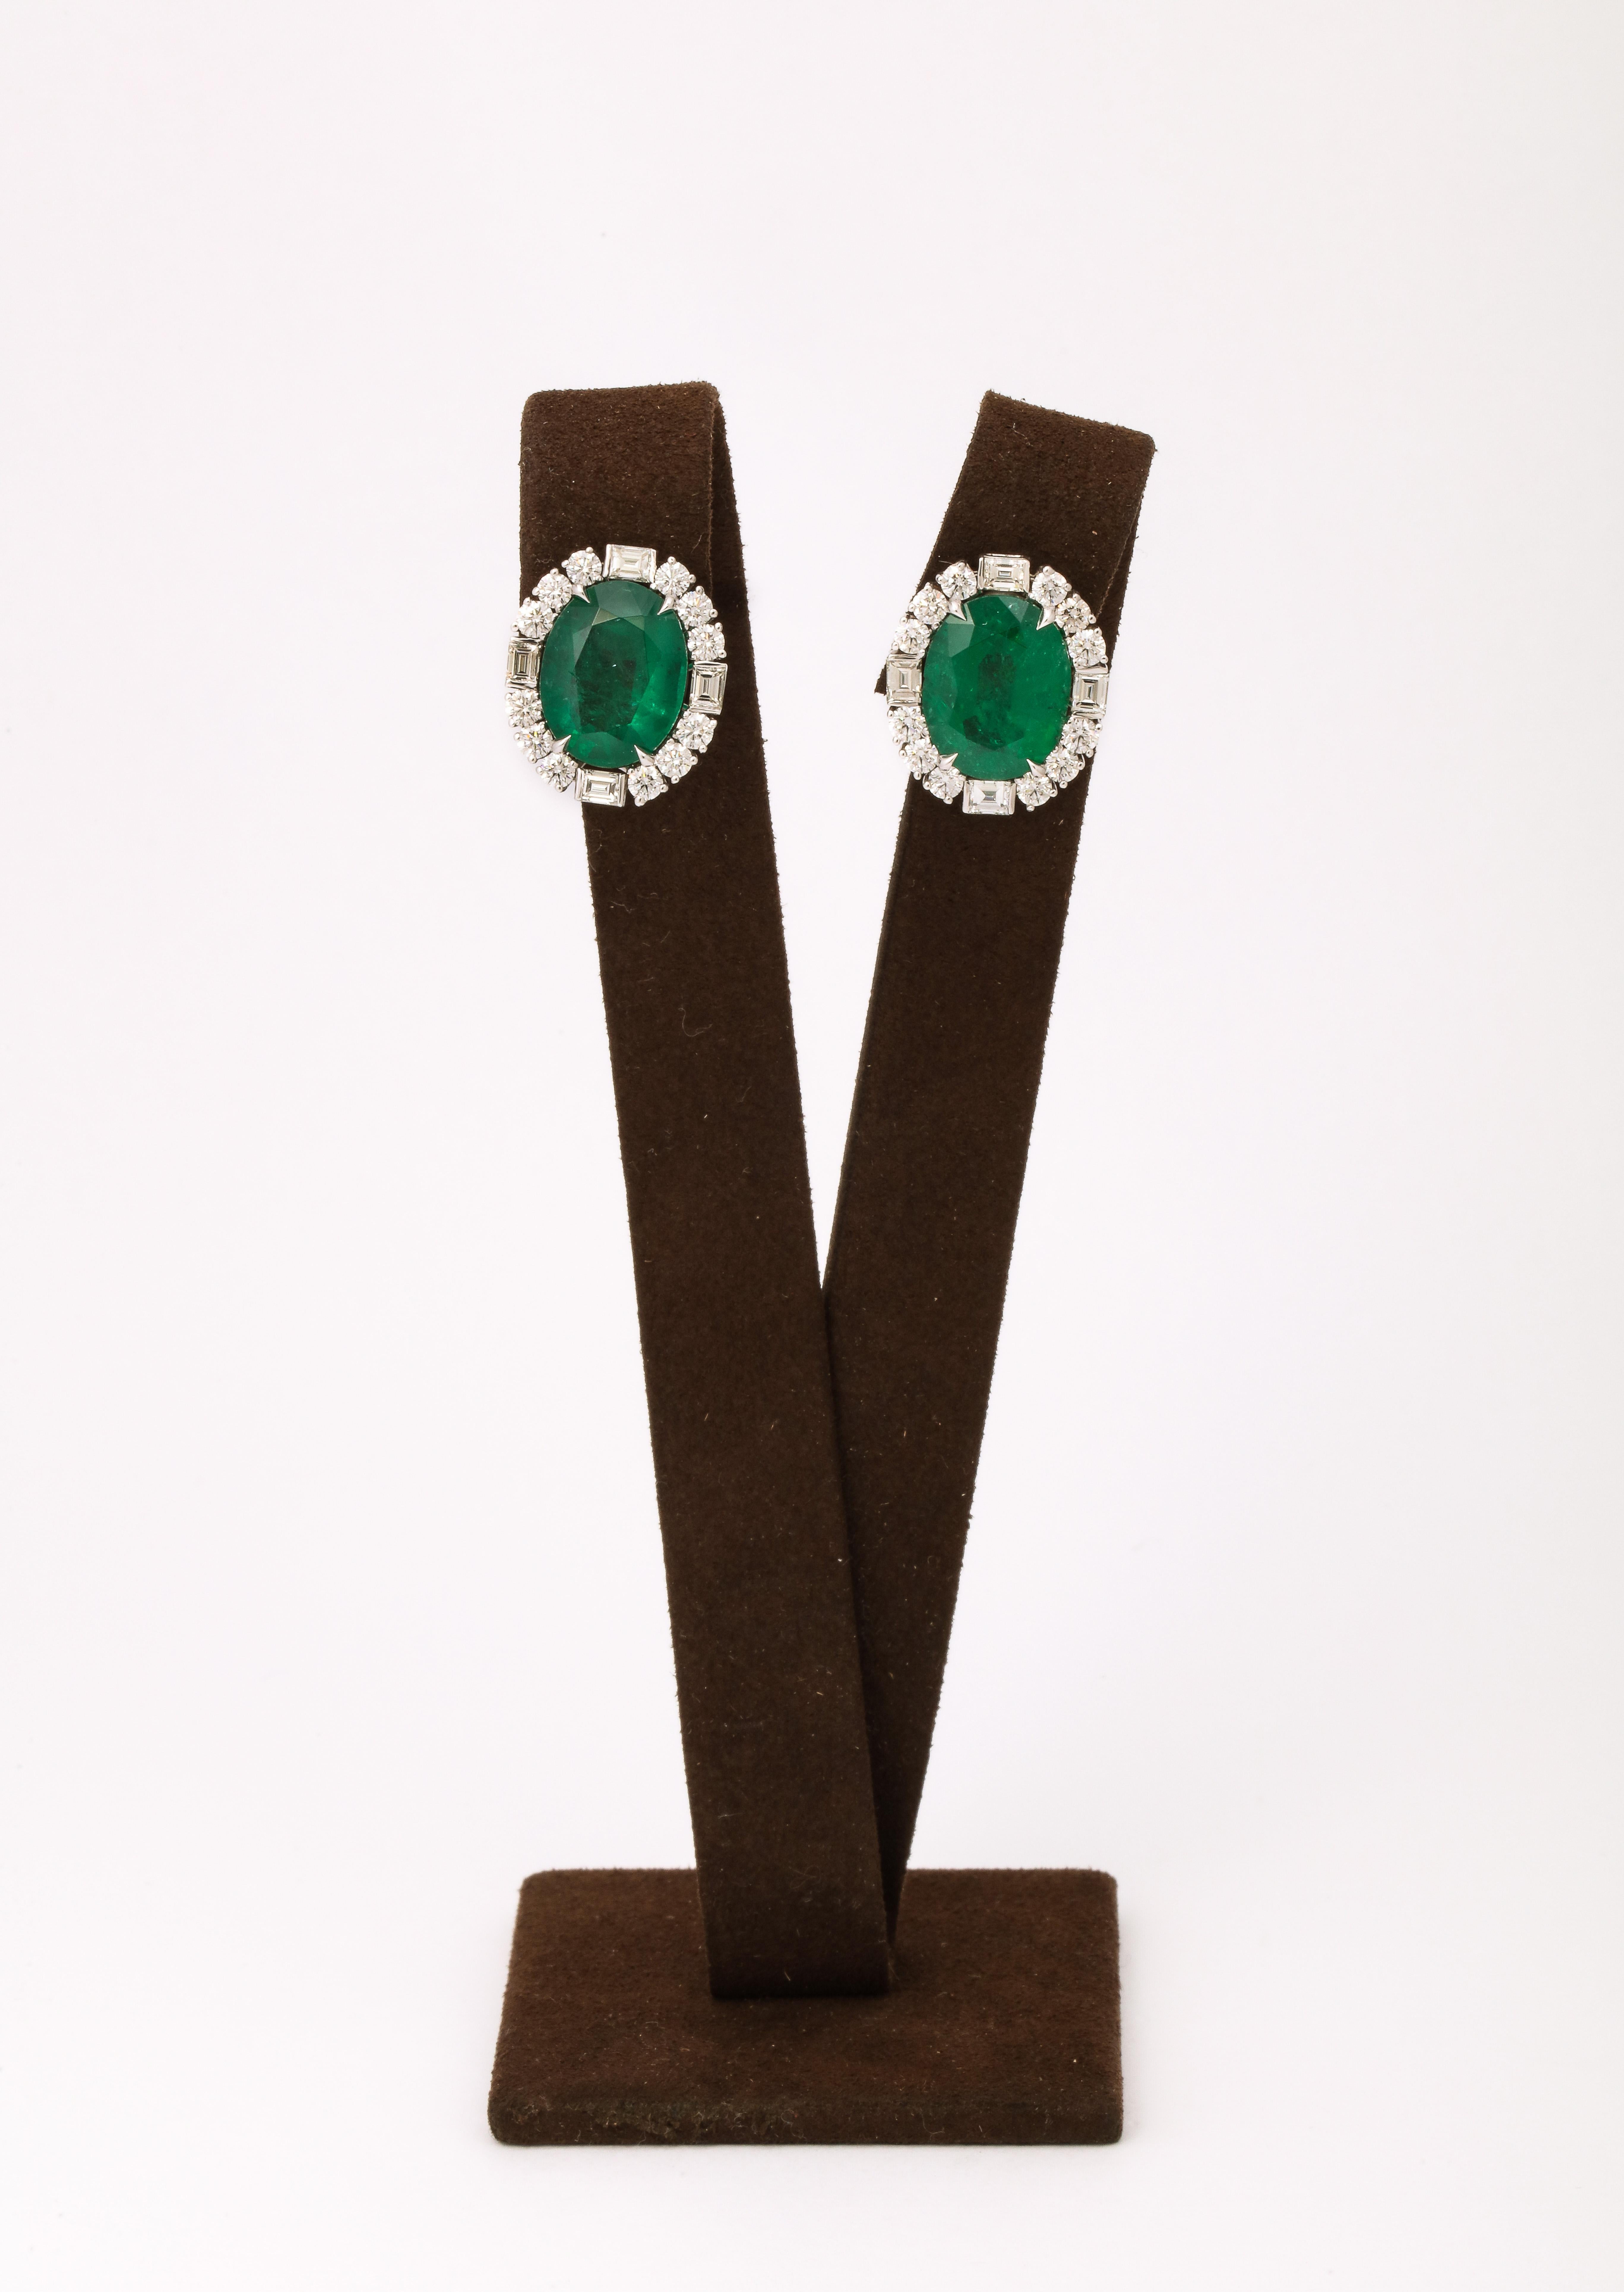 
12.90 carats of certified Intense Green Fine Oval Emeralds.

3.38 carats of white baguette and round brilliant cut diamonds.  

Set in 18 white gold. 

.75 inches long. 

Certified by Christian Dunaigre of Switzerland. 